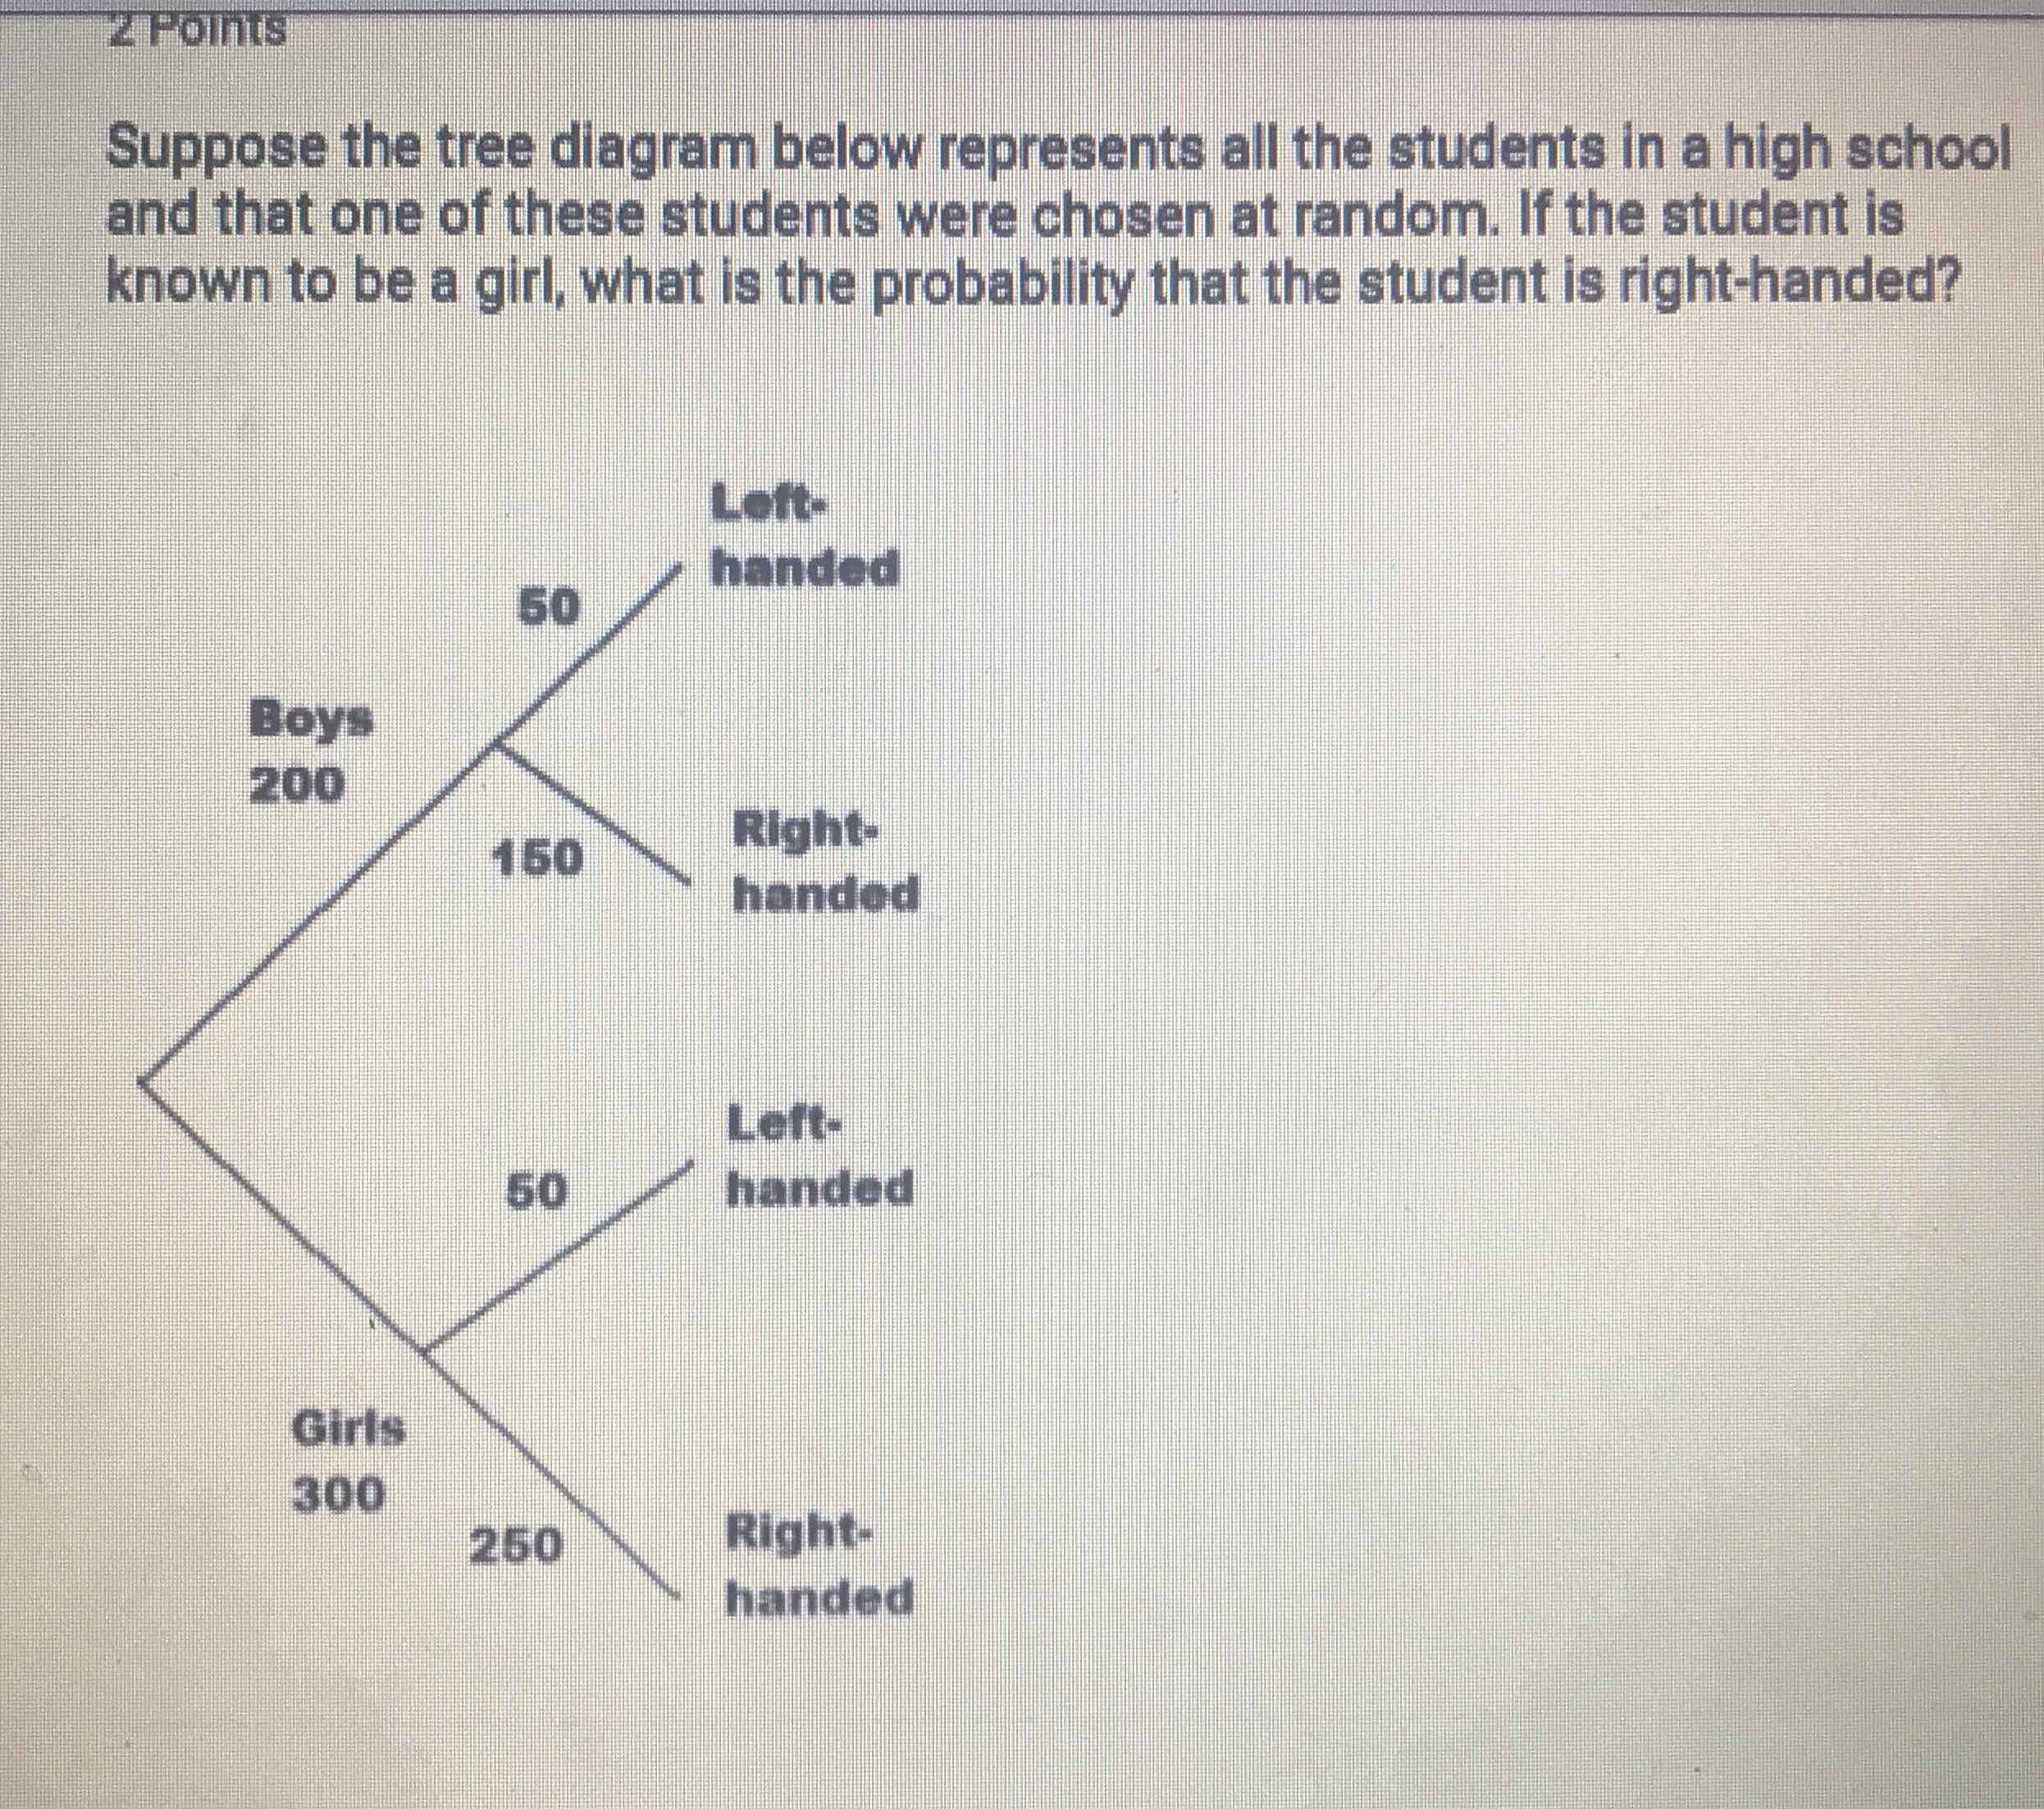 2 Polnis
Suppose the tree diagram below represents all the students in a high school and that one of these students were chosen at random. If the student is known to be a girl, what is the probability that the student is right-handed?